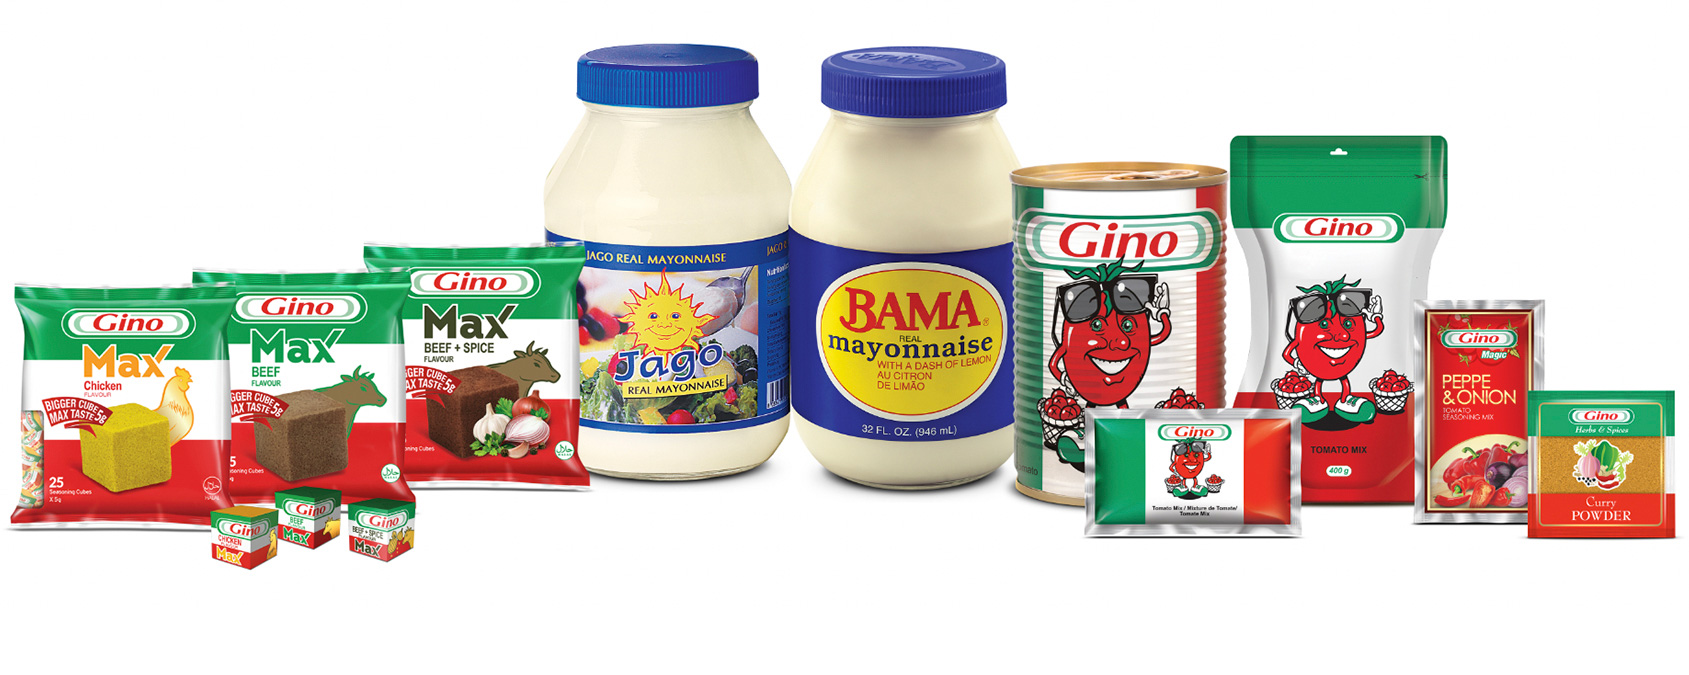 GB Foods is one of Nigeria's emerging multinational companies   